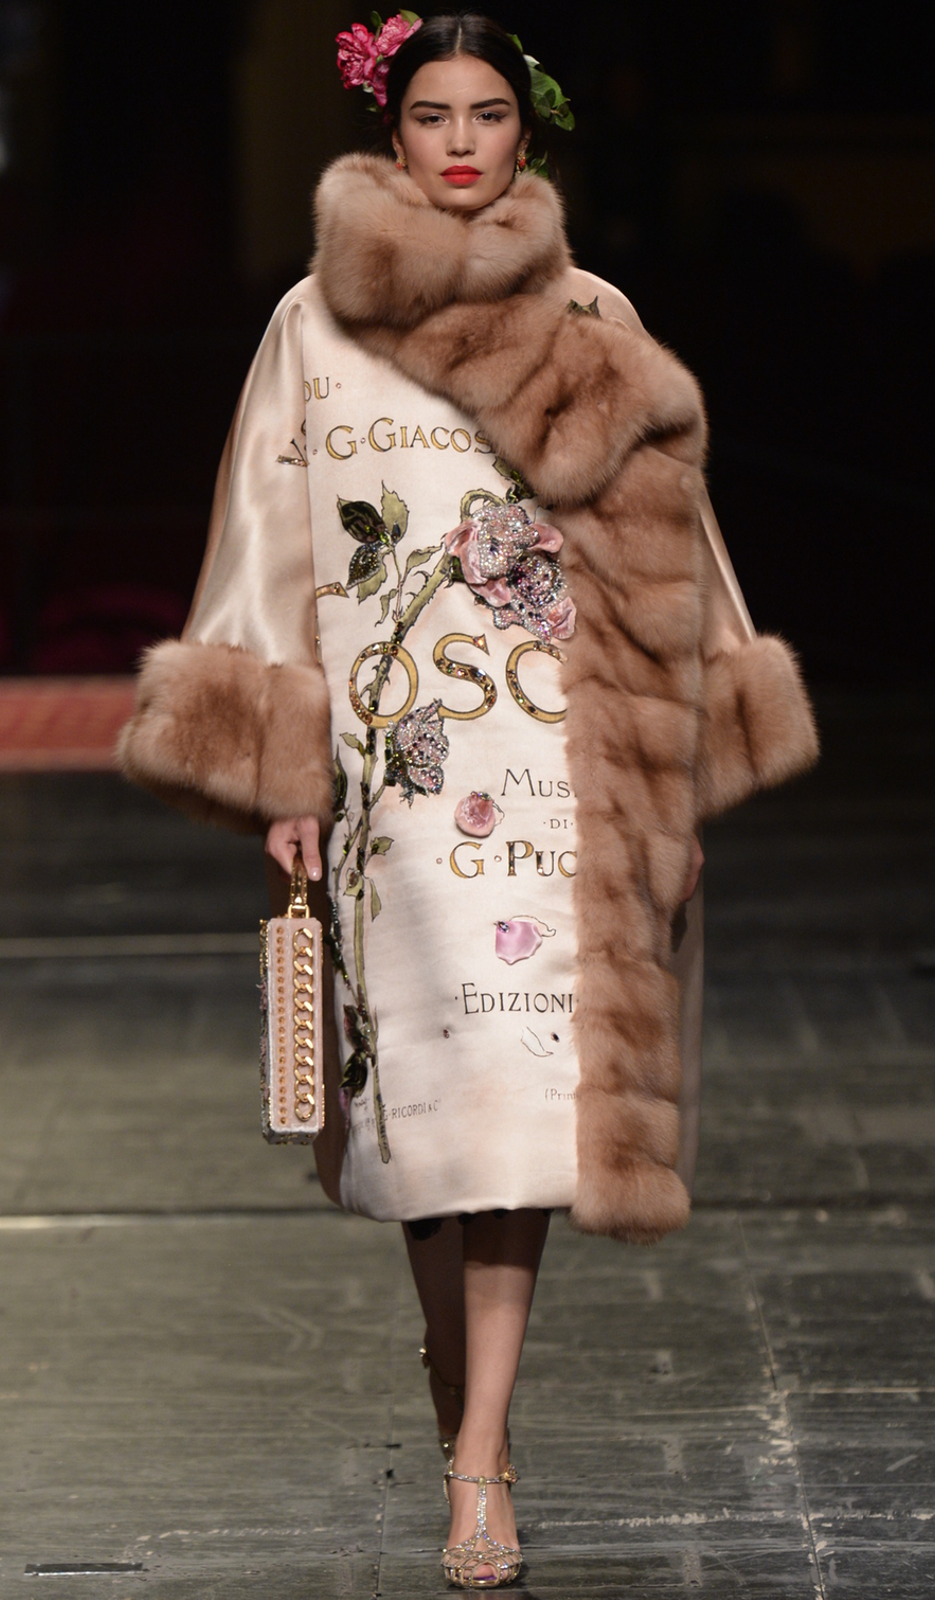 & LOOKandLOVEwithLOLO: 2016 featuring Gabbana Spring Dolce Couture